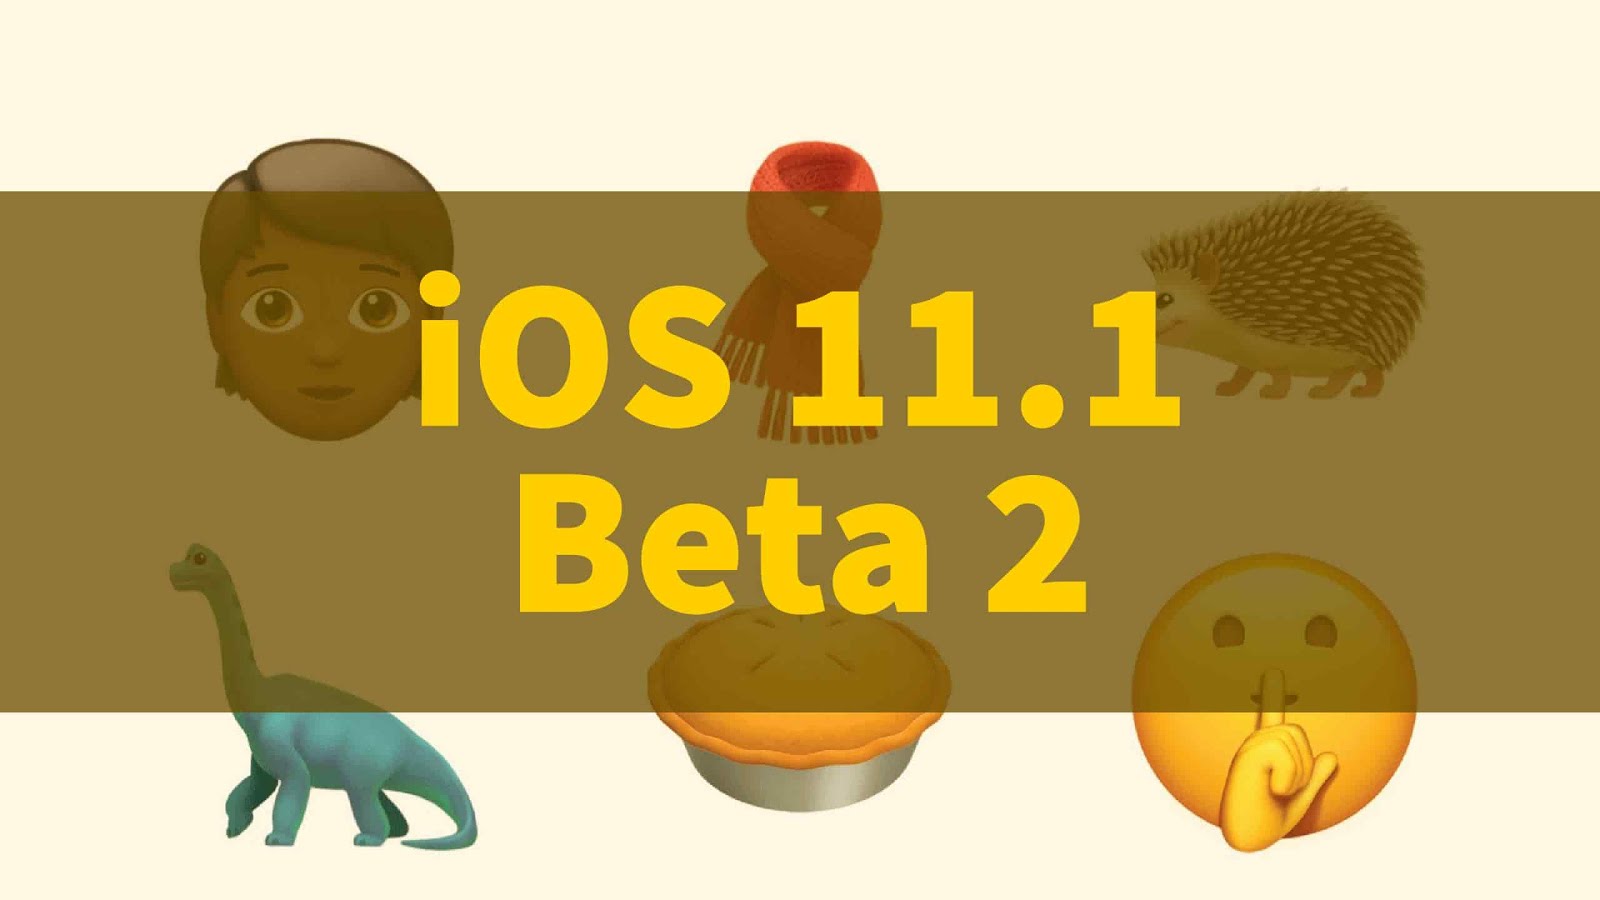 Not a developer? Want to install iOS 11.1 beta 2 on your iPhone/iPad without developer account? You are welcome in this post..